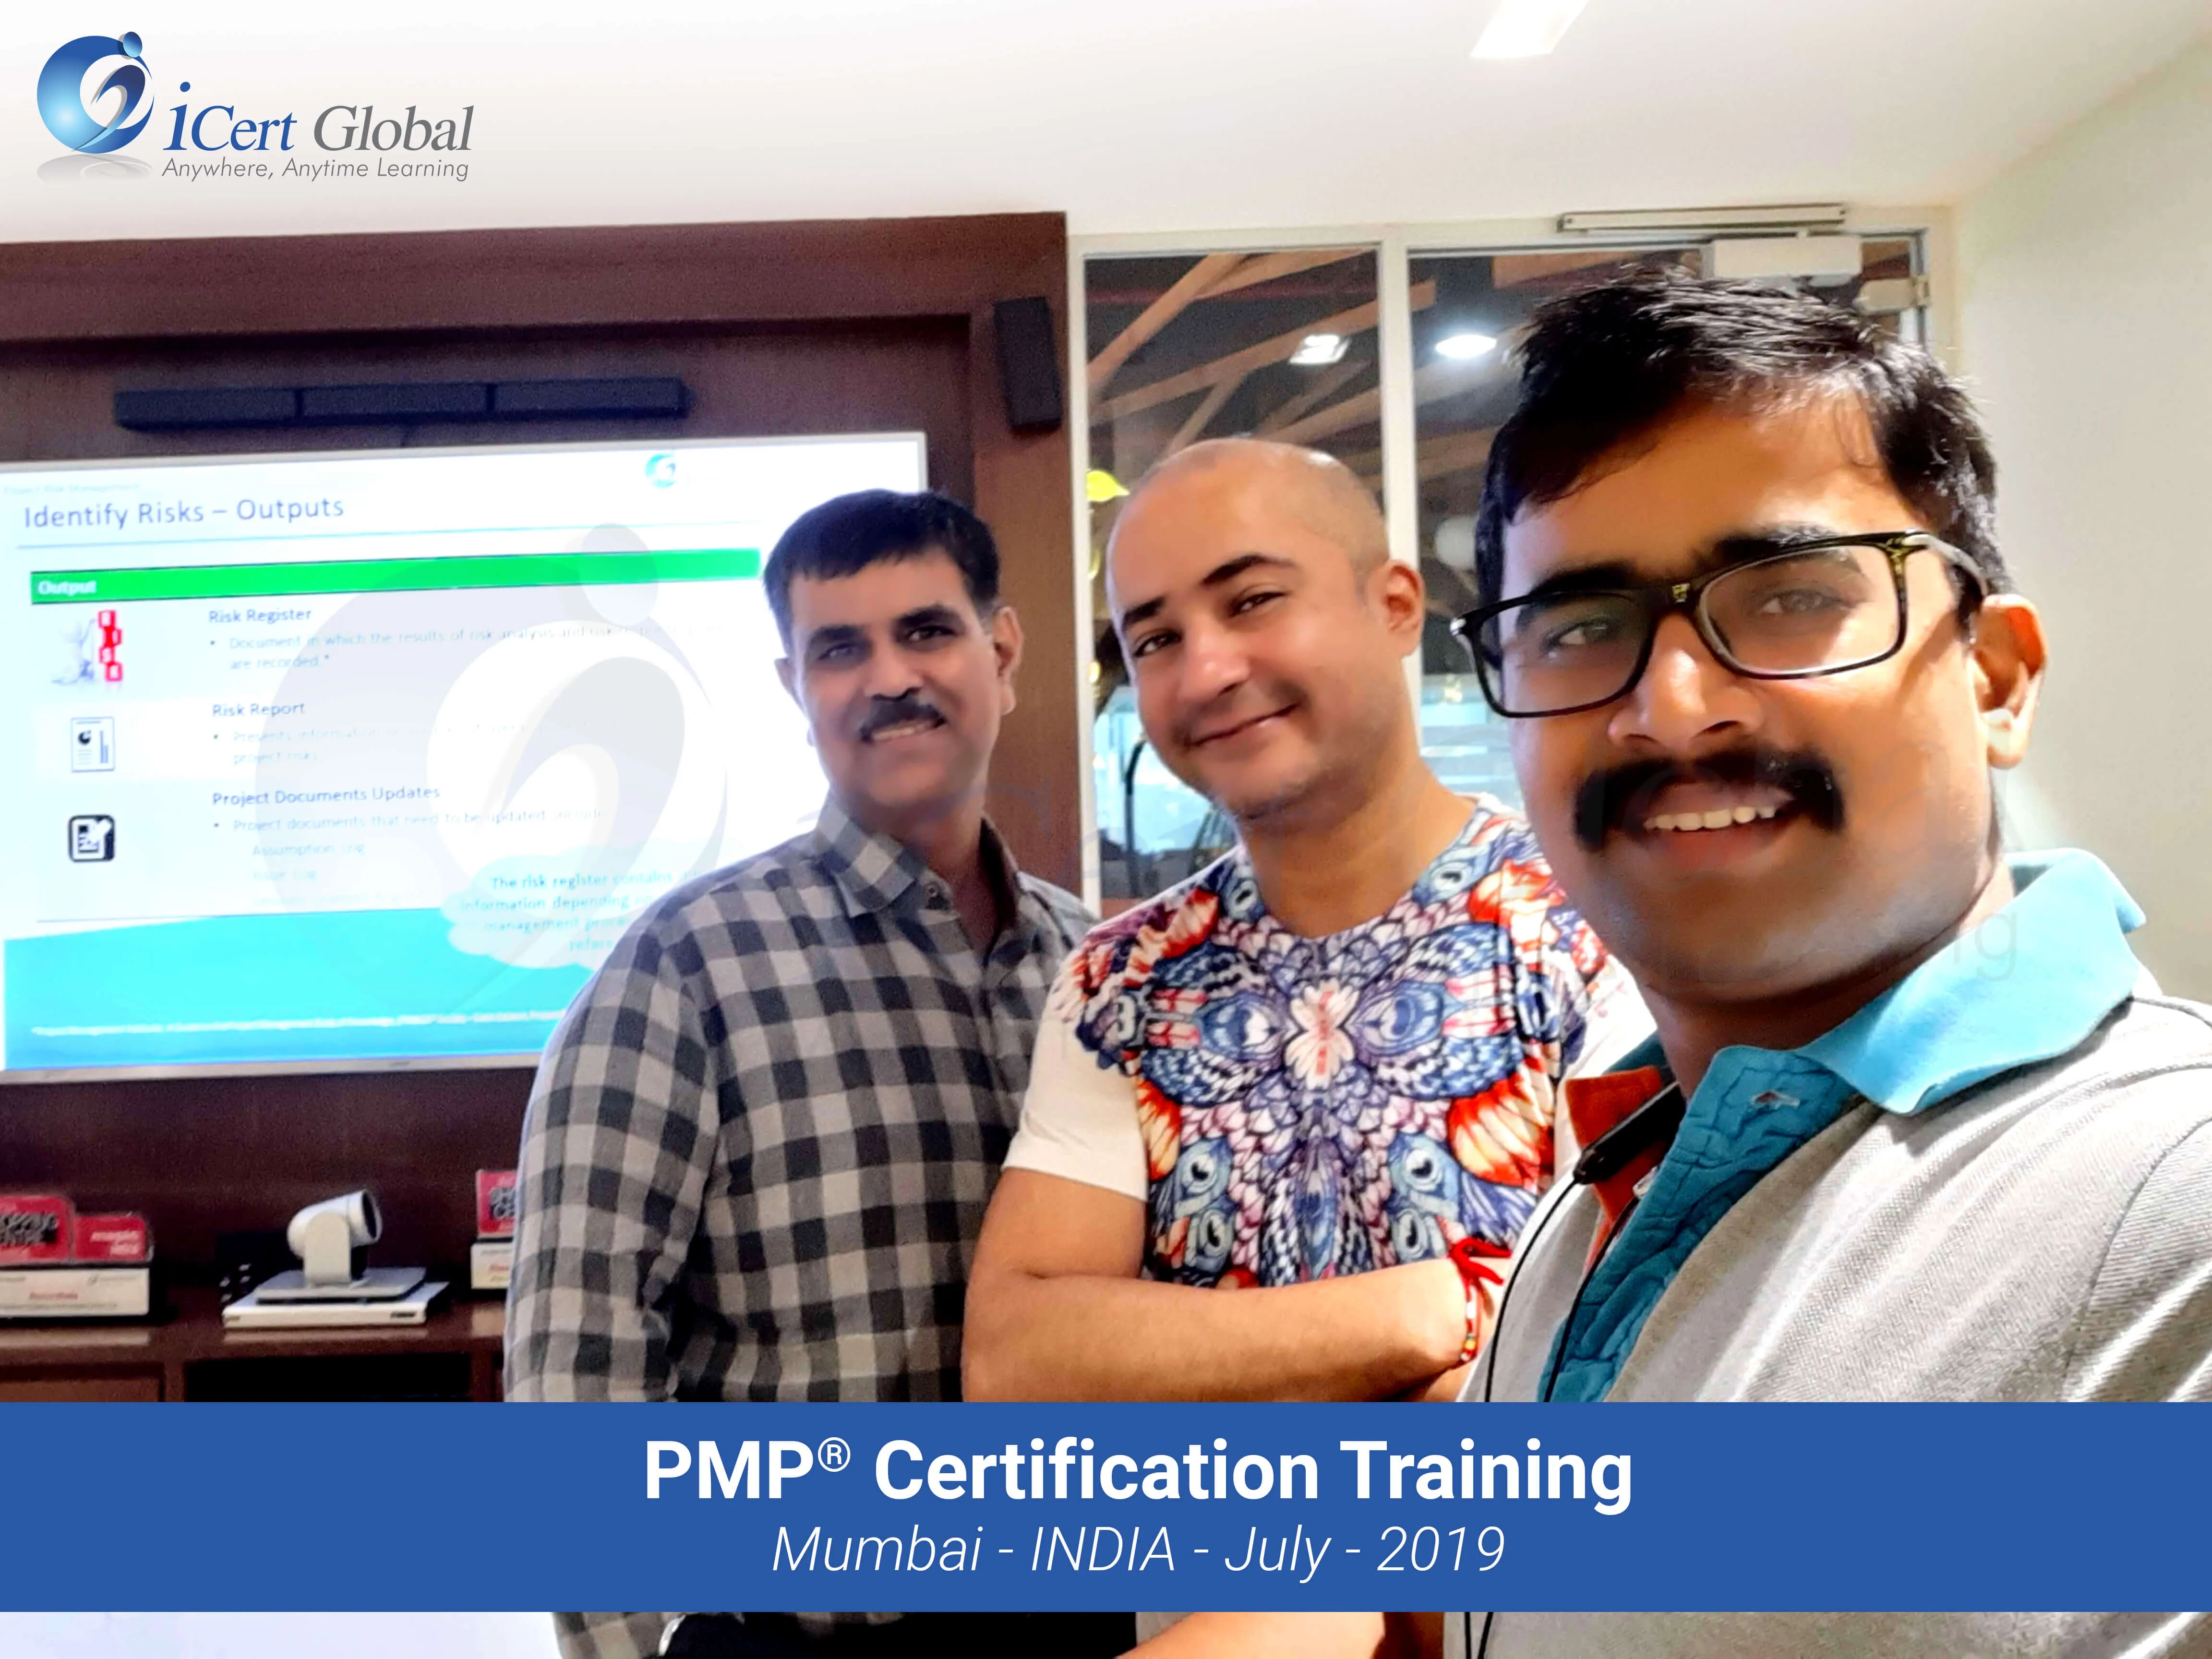 PMP Project Management Certification Training in Mumbai by iCert Global in July 2019  